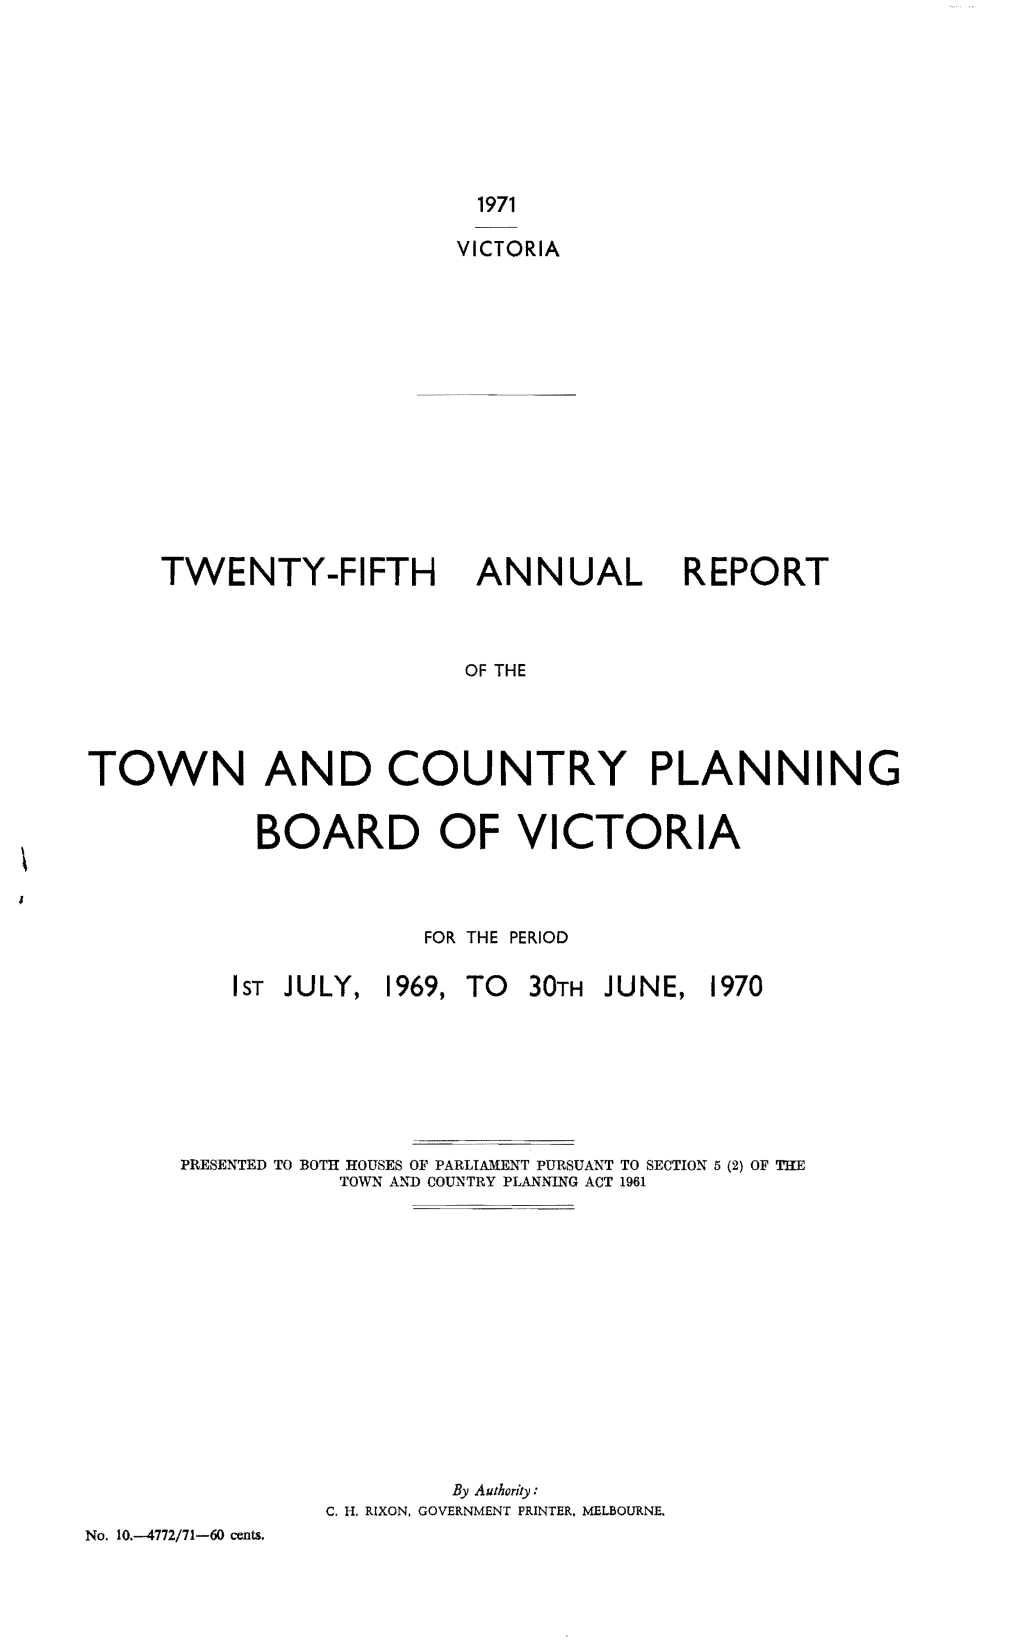 Town and Country Planning Board of Victoria \